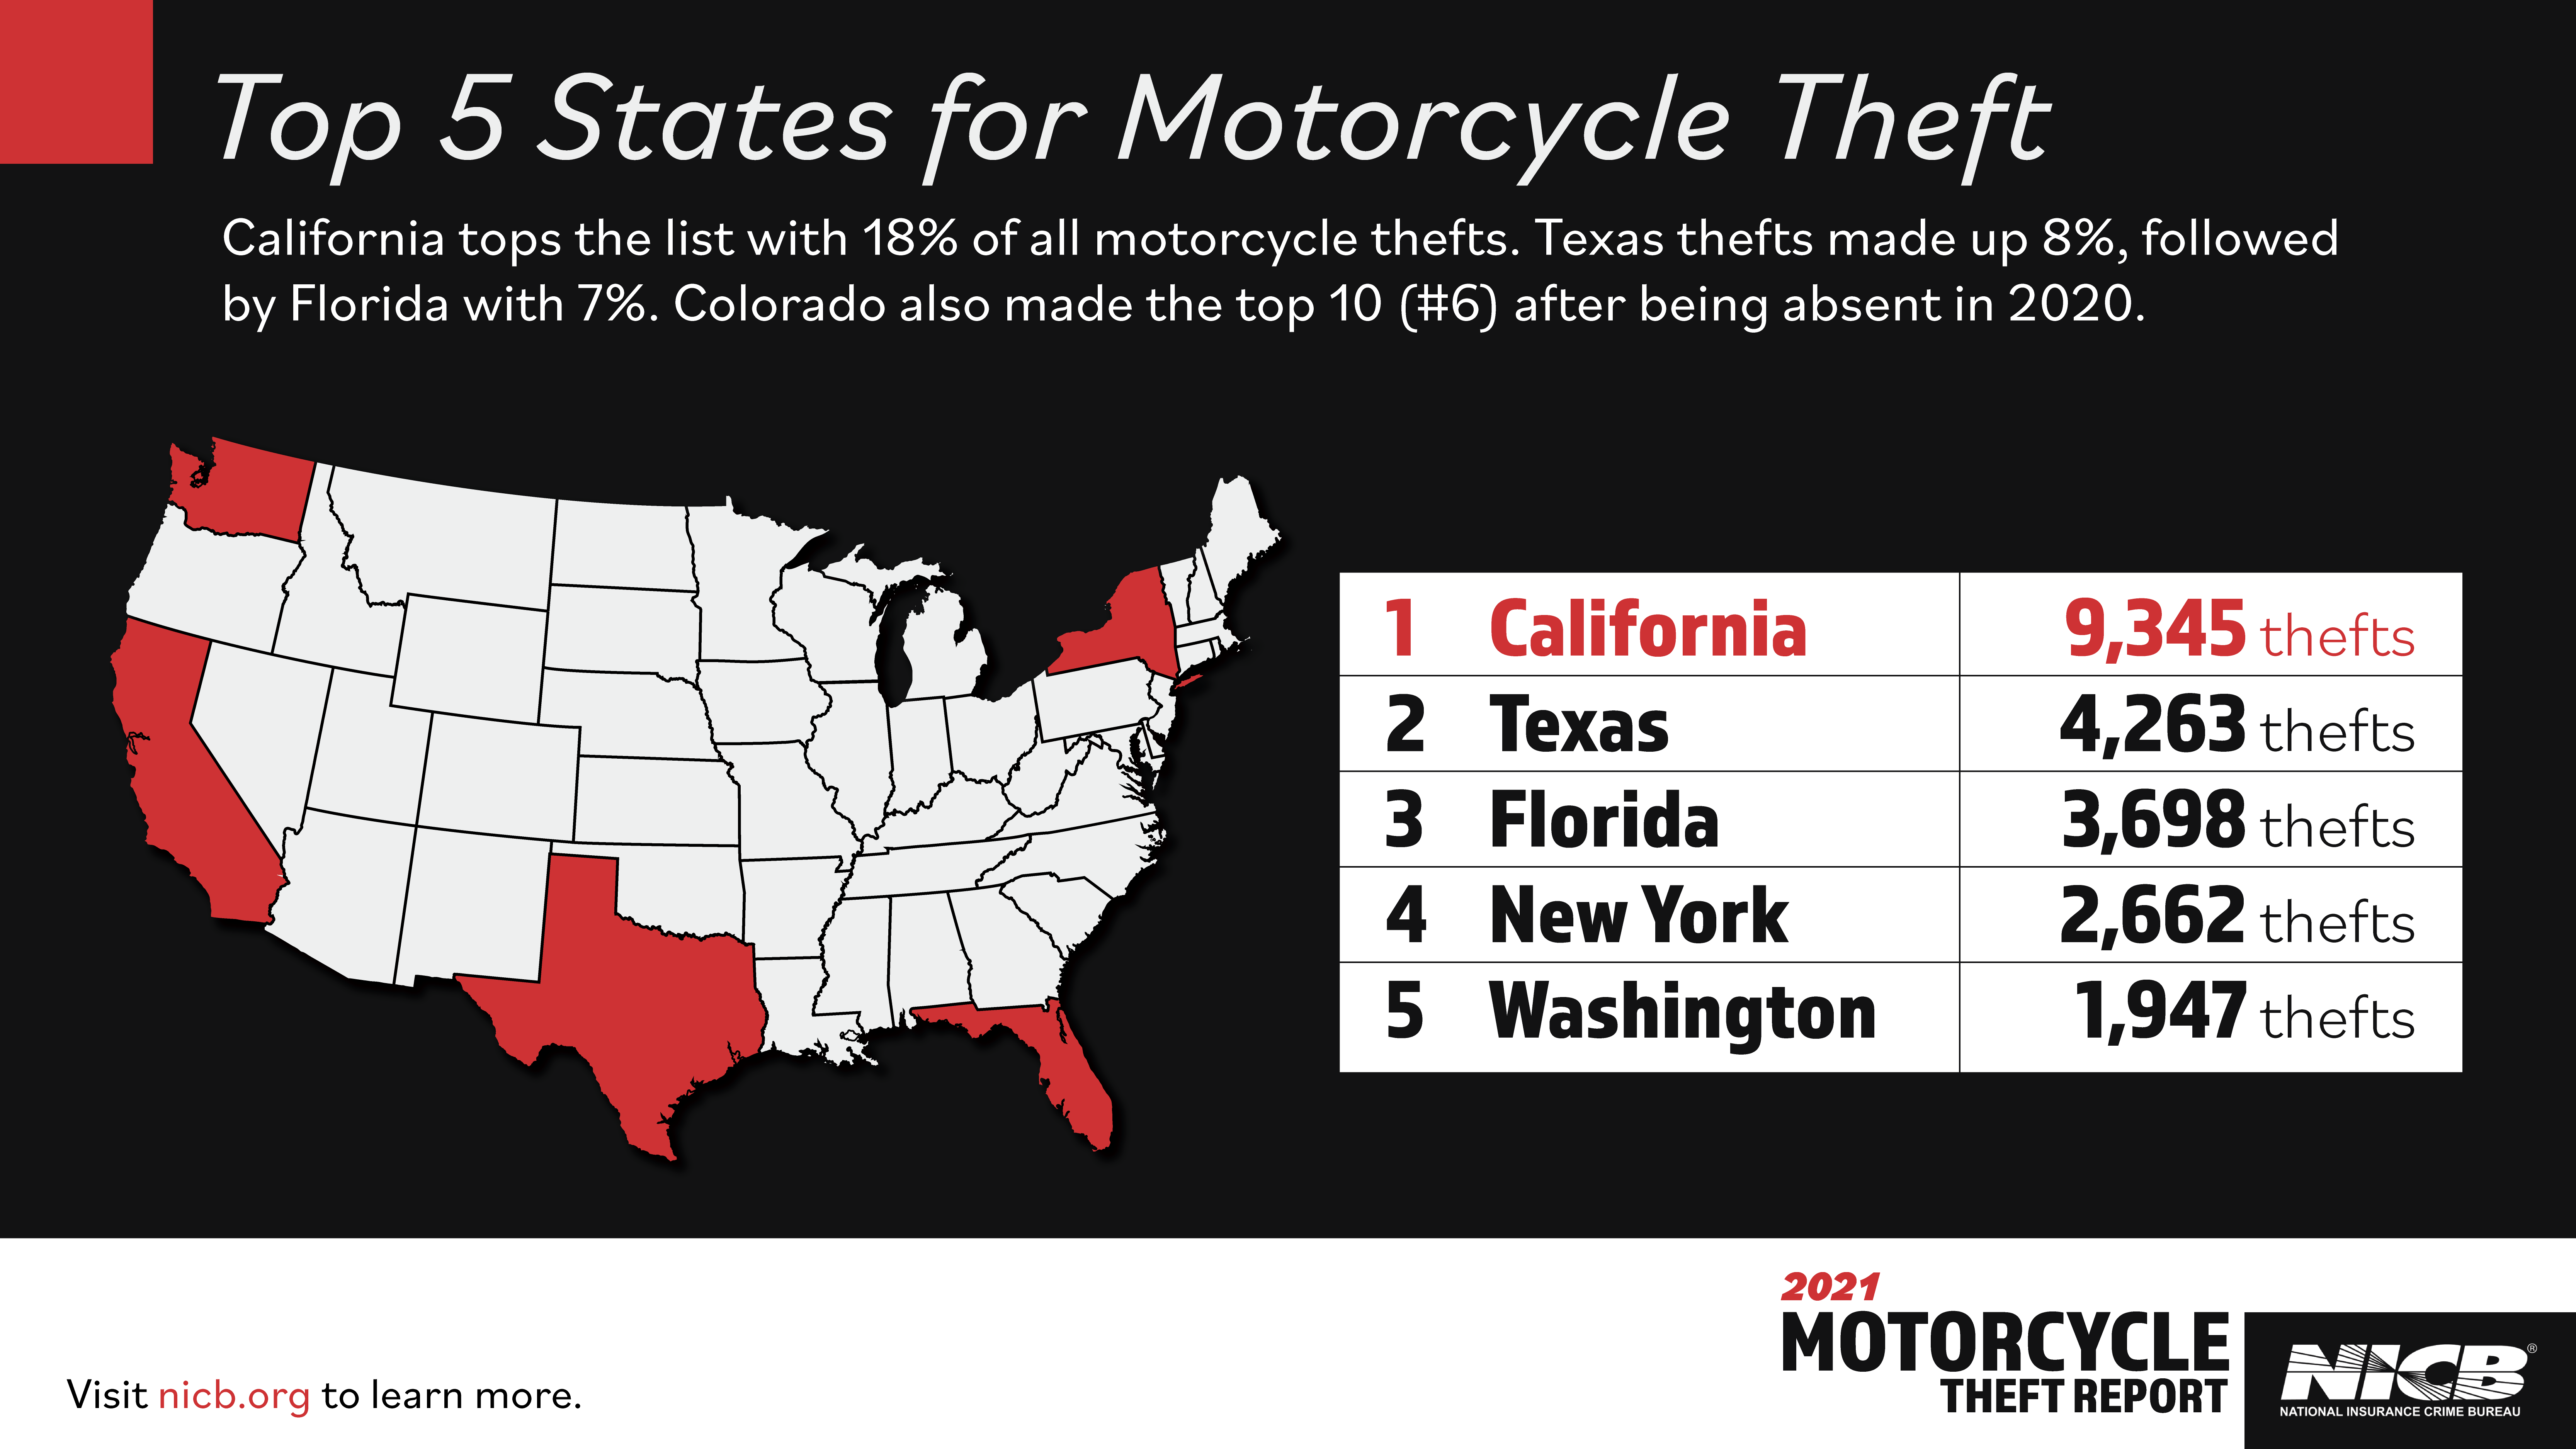 Top 5 States for Motorcycle Theft